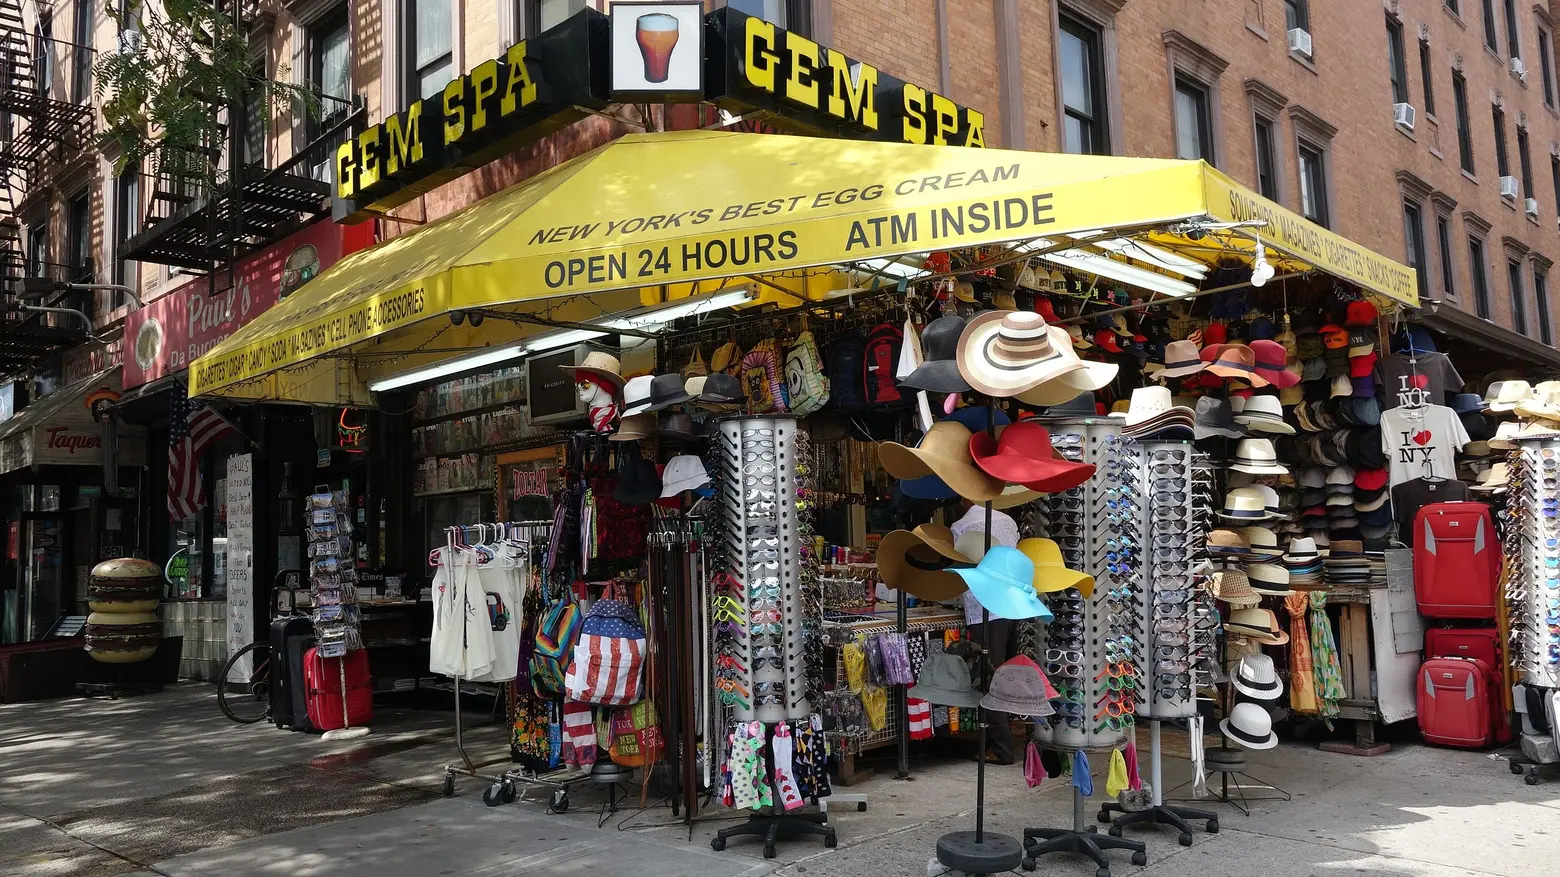 Join the cash mob to help save St. Mark’s bodega Gem Spa